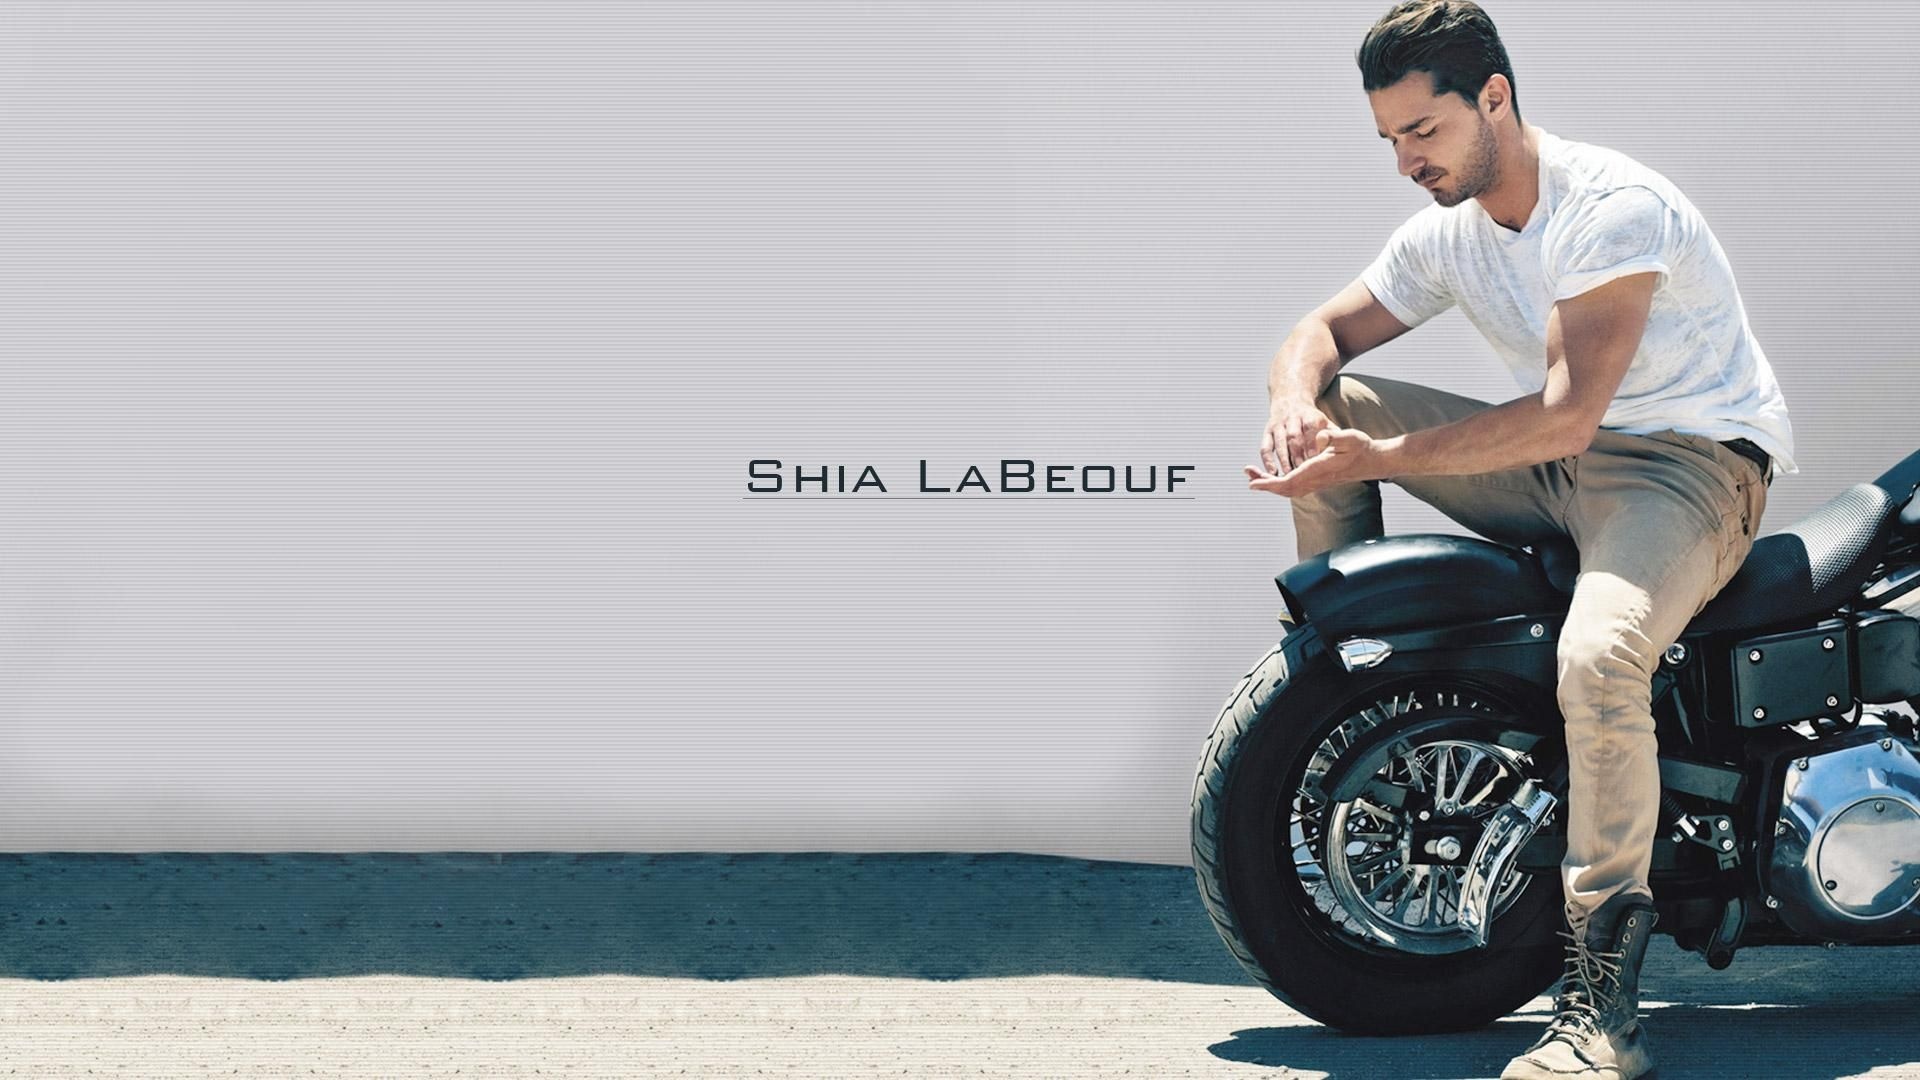 Shia LaBeouf, Visionary actor, Inspirational quotes, Top 10 in 2015, 1920x1080 Full HD Desktop